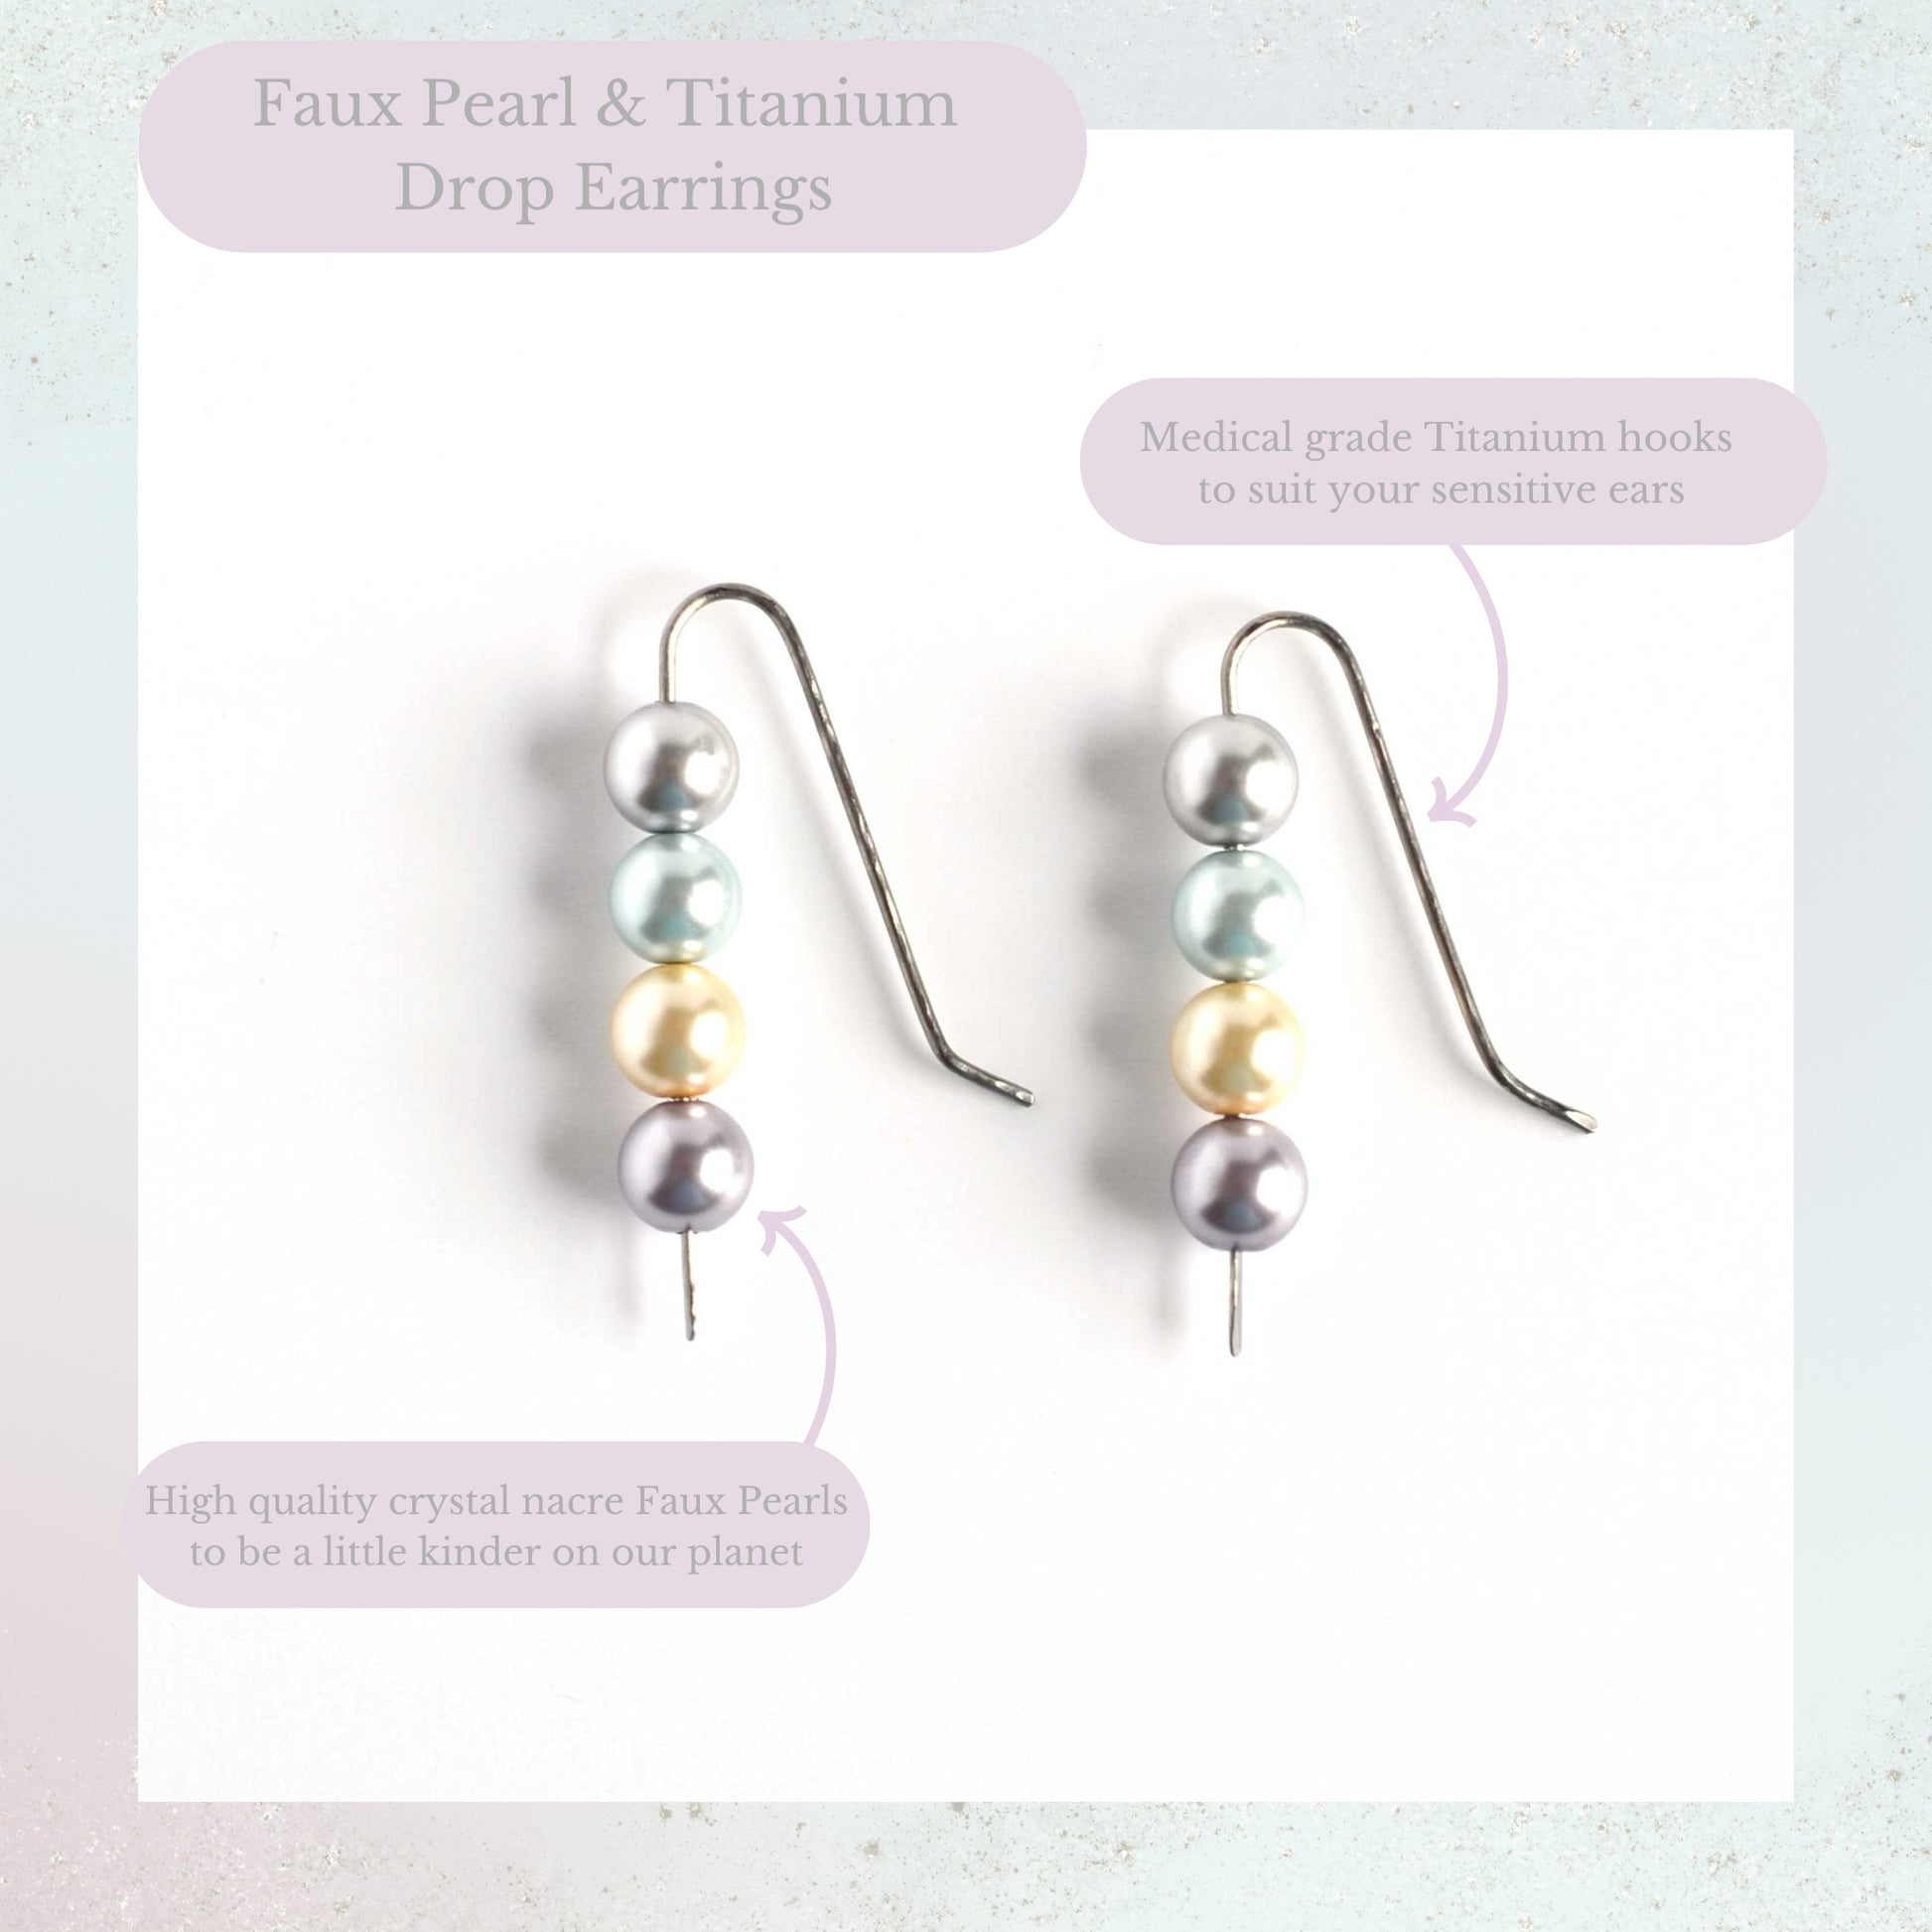 Faux pearl and Titanium drop earrings product information graphic